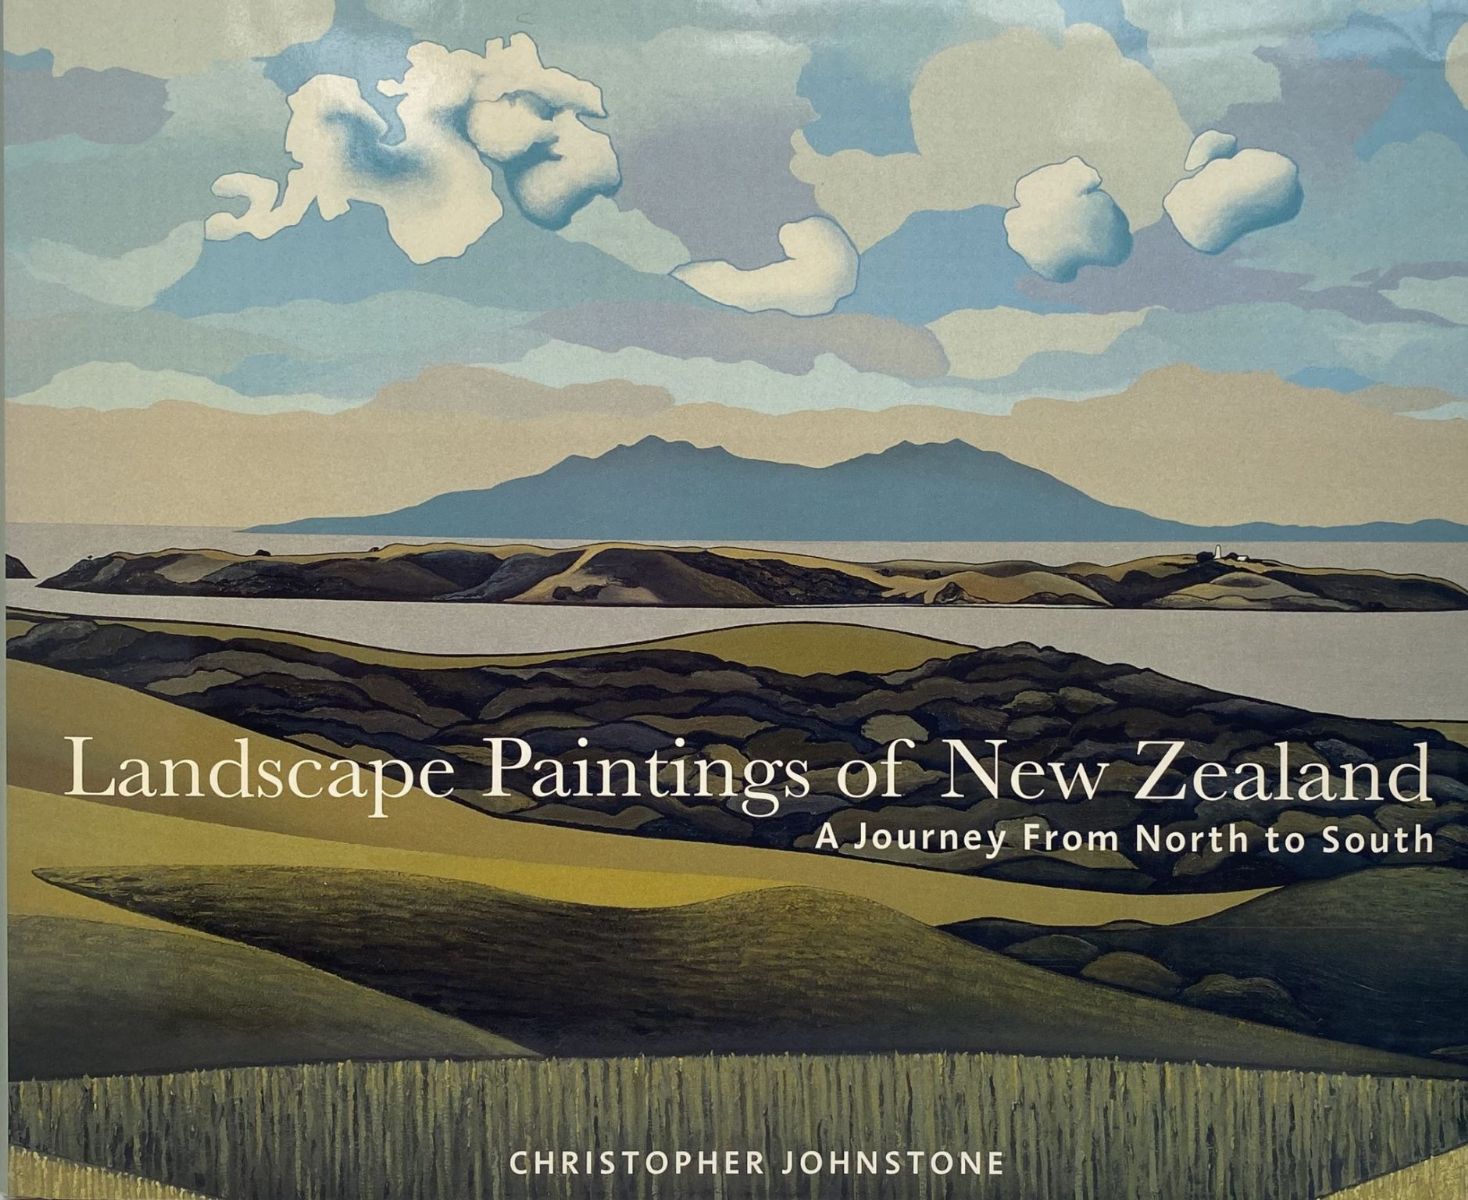 Landscape Paintings of New Zealand - A Journey from North to South